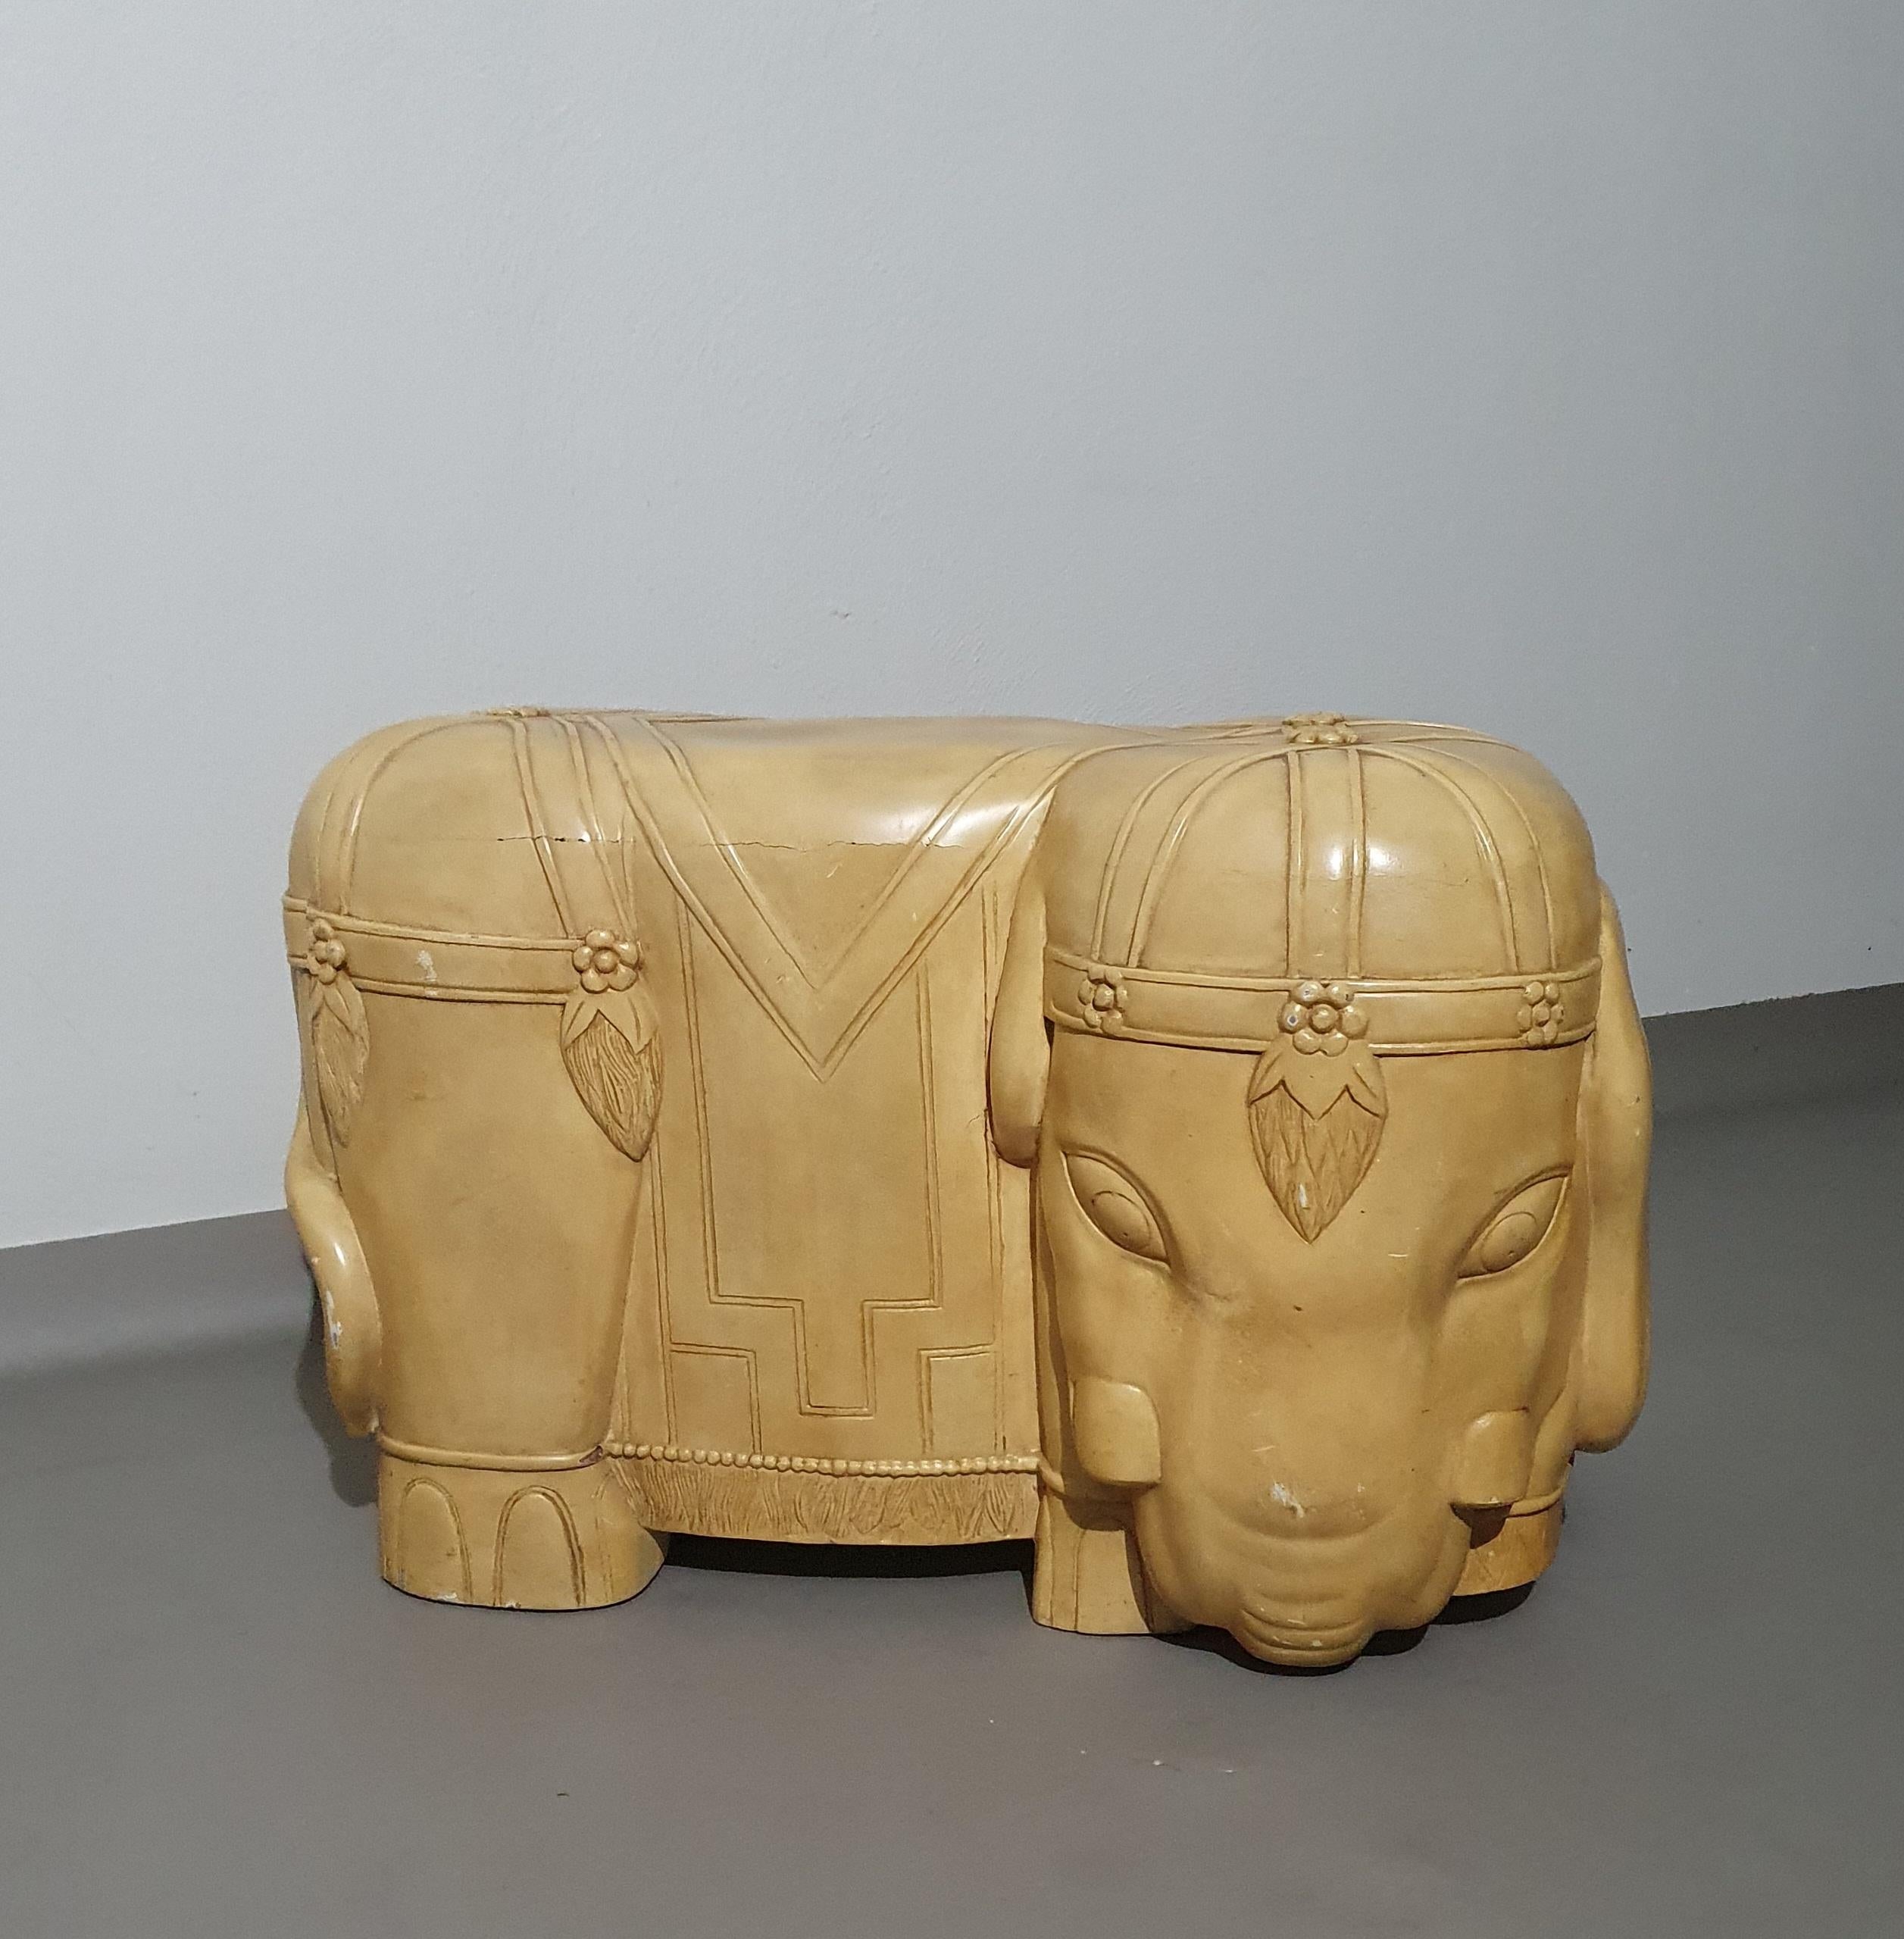 Other Decorative wood and resin elephant form table For Sale